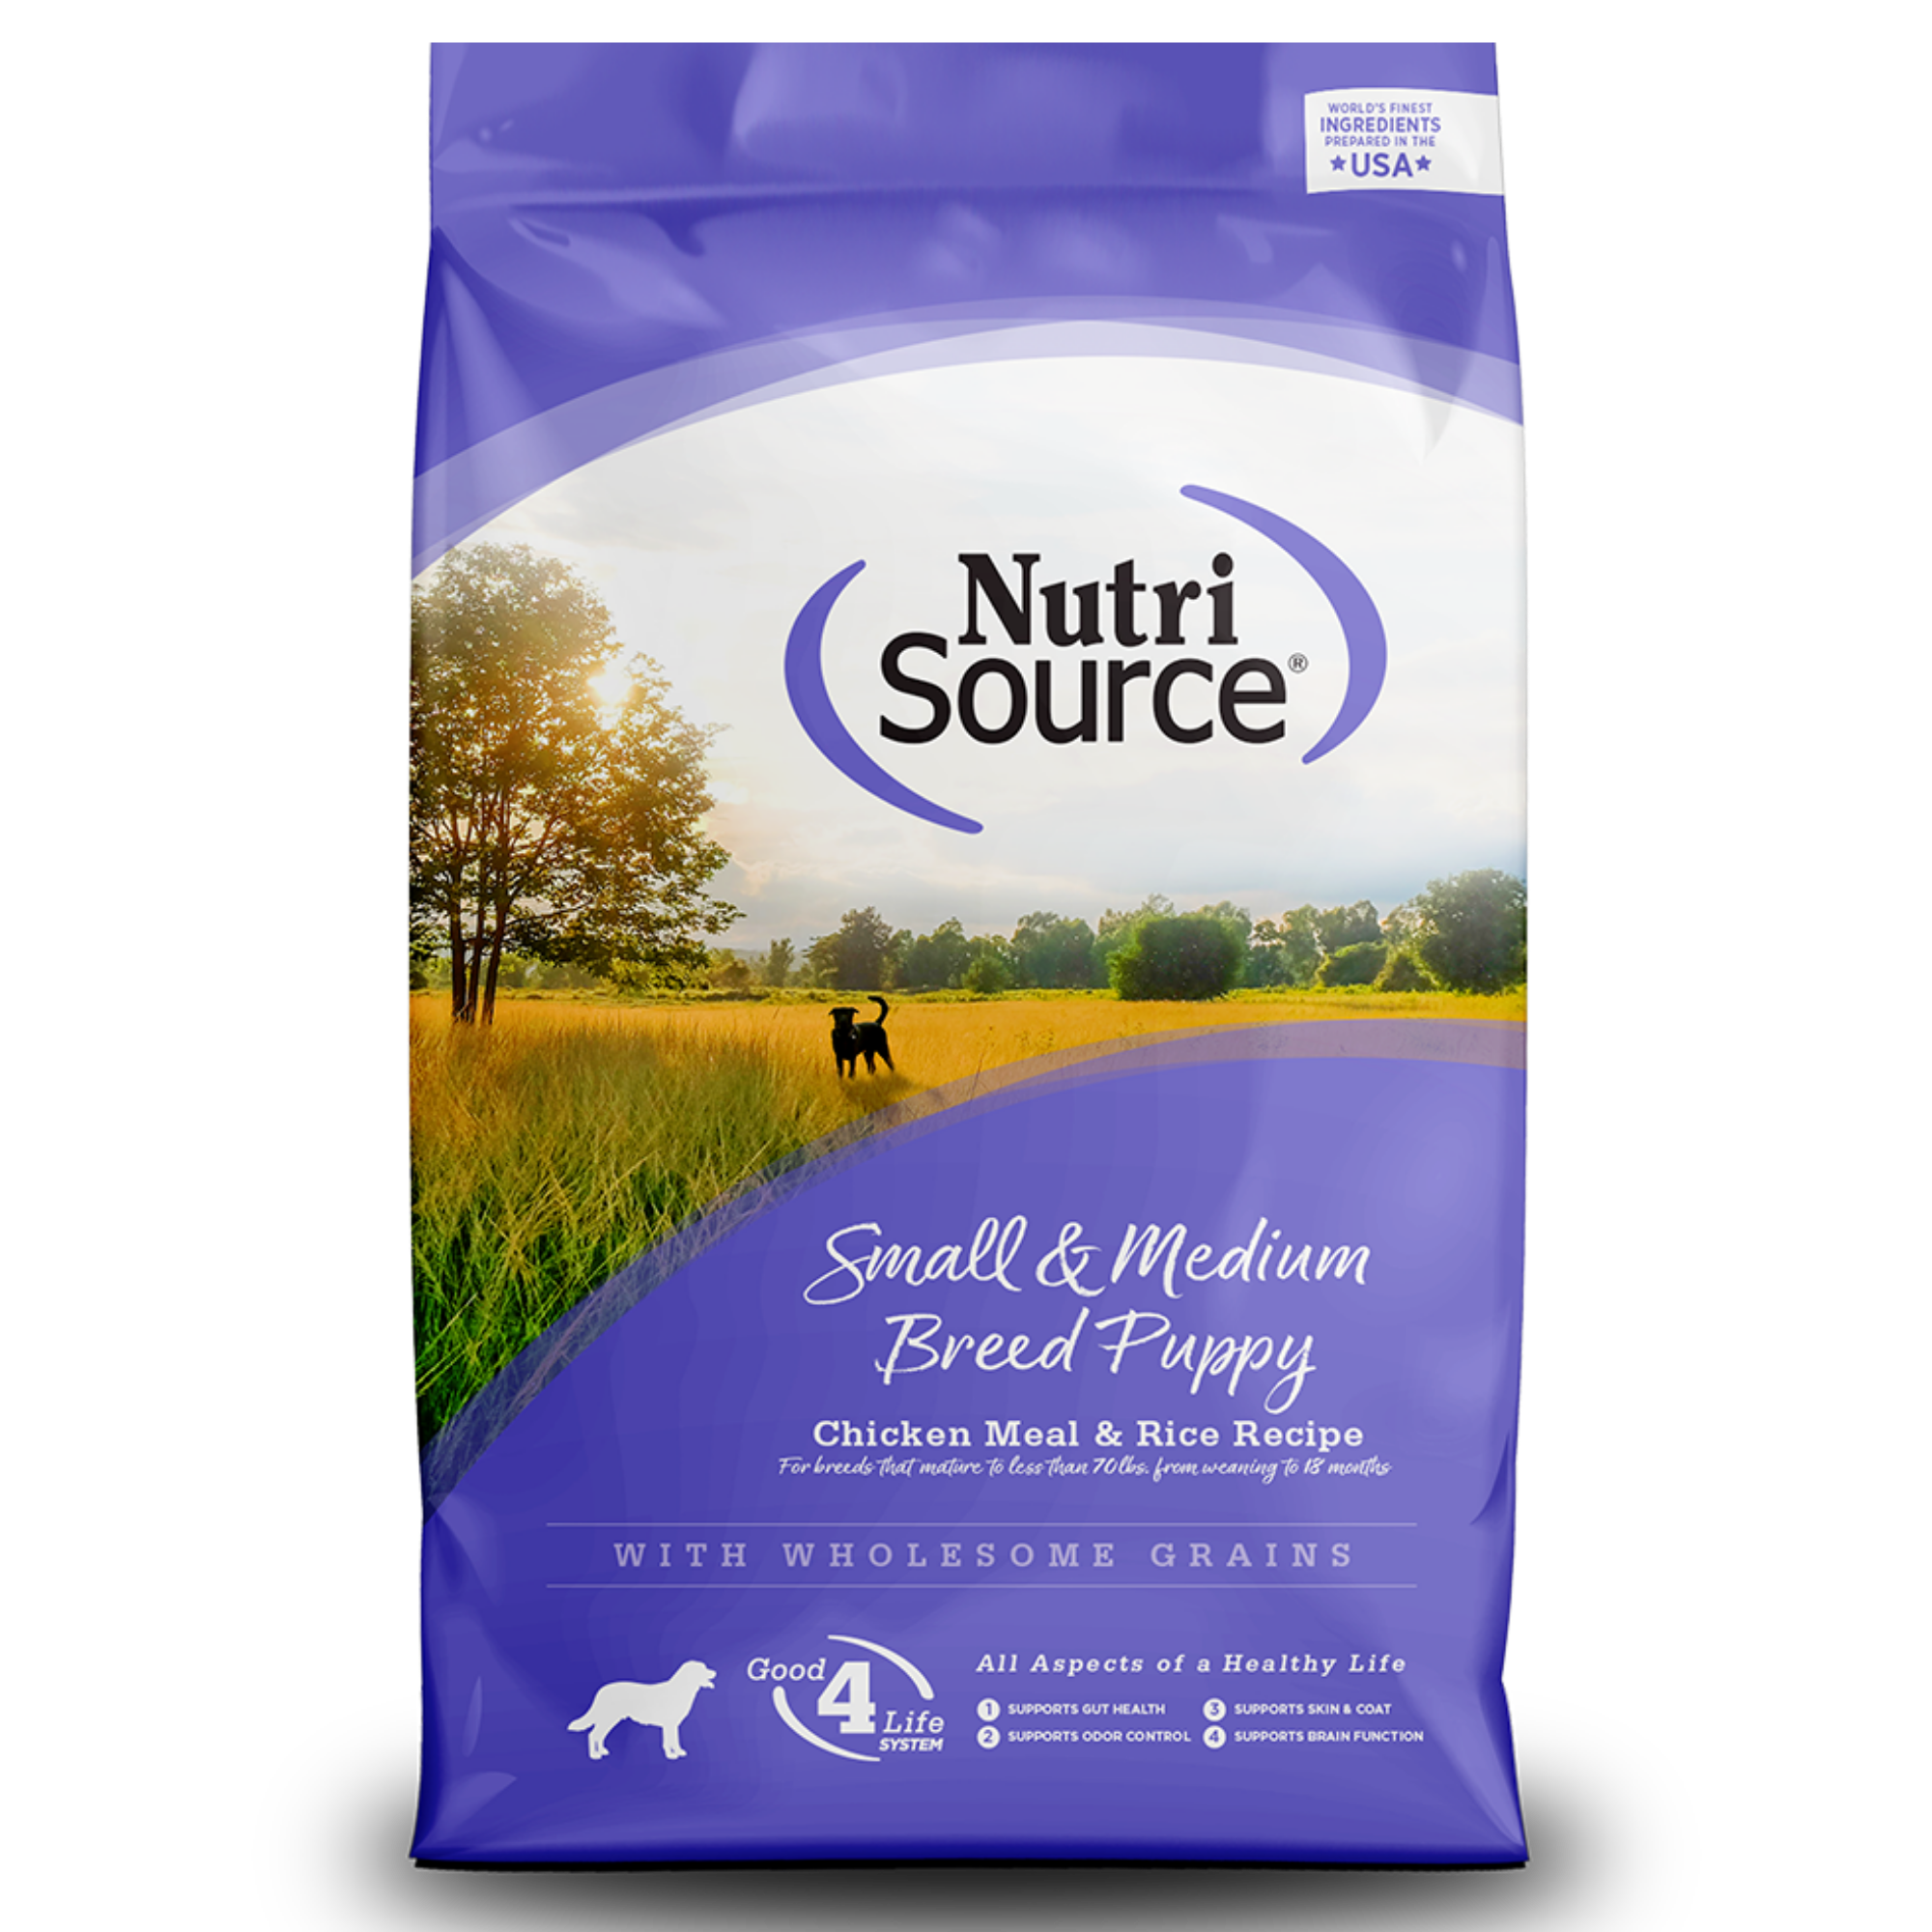 NutriSource Small & Medium Breed Puppy Chicken & Rice Formula Dry Dog Food - Mutts & Co.